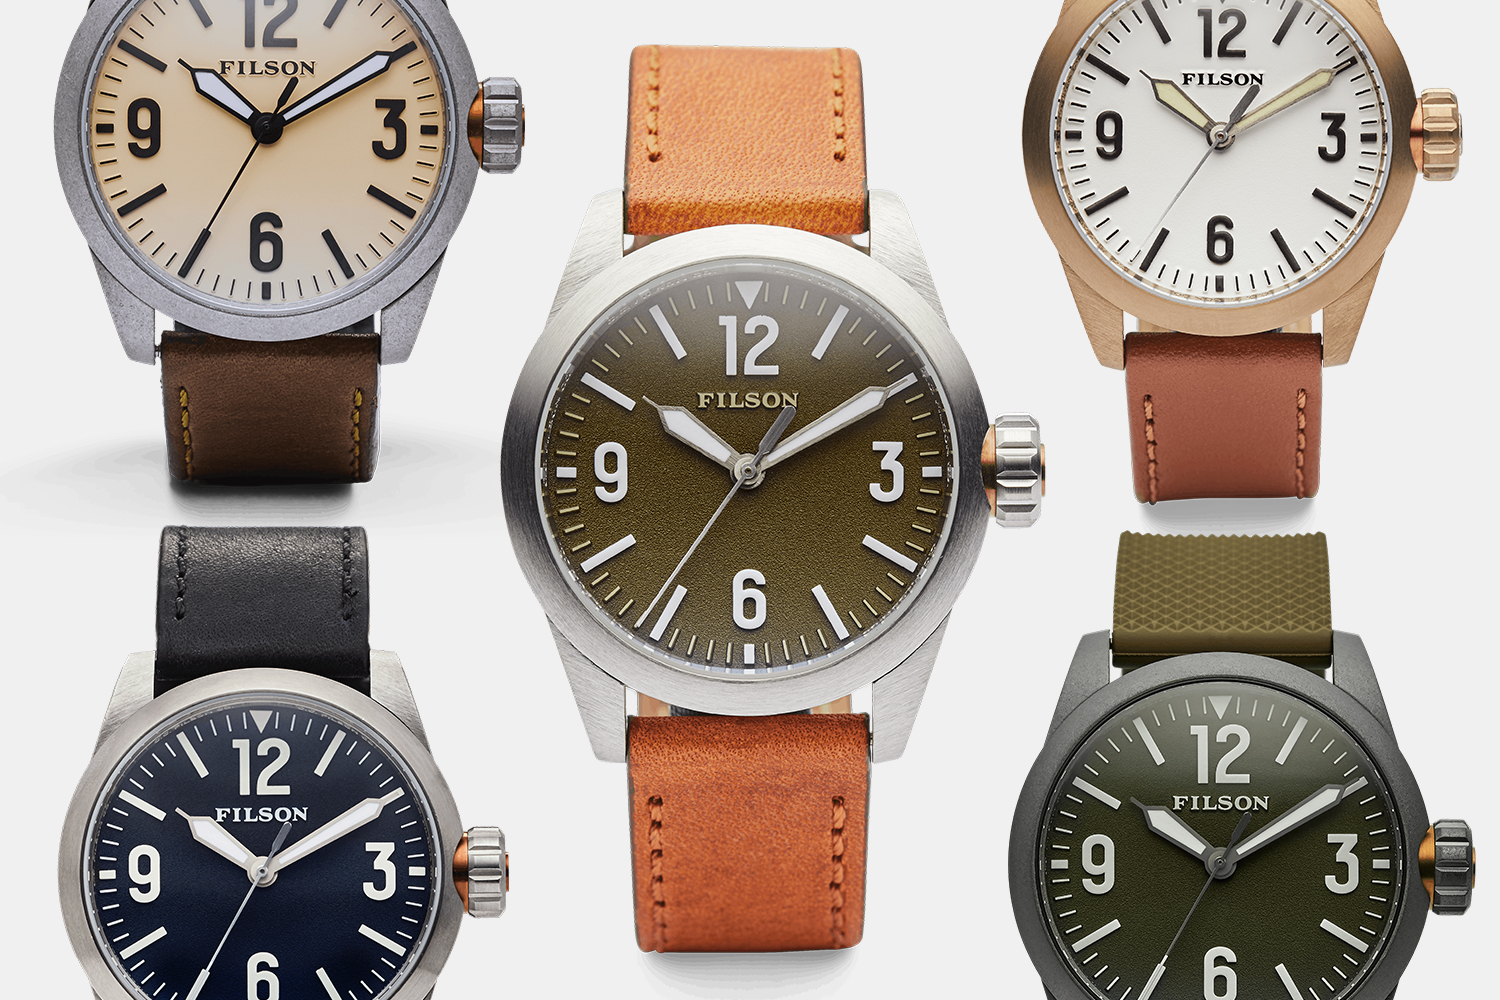 Filson Field Watches Are $150 Off During the Winter Sale - InsideHook